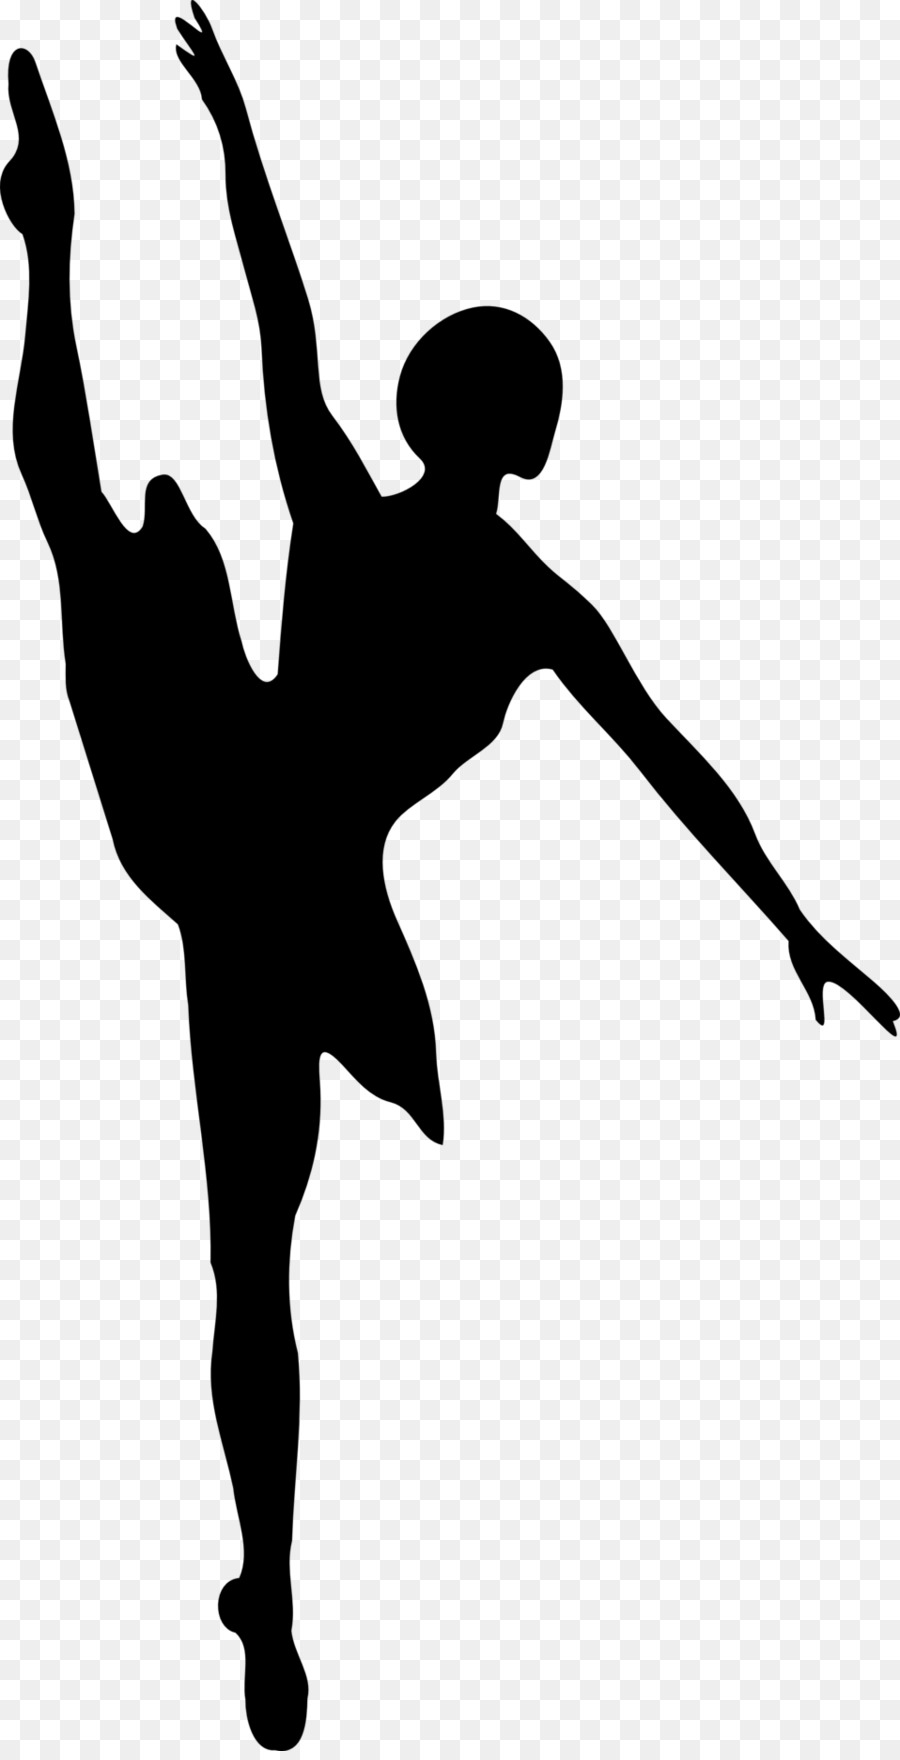 Argentine tango Dance Silhouette - dancing png download - 1066*1200 - Free Transparent Tango png Download.